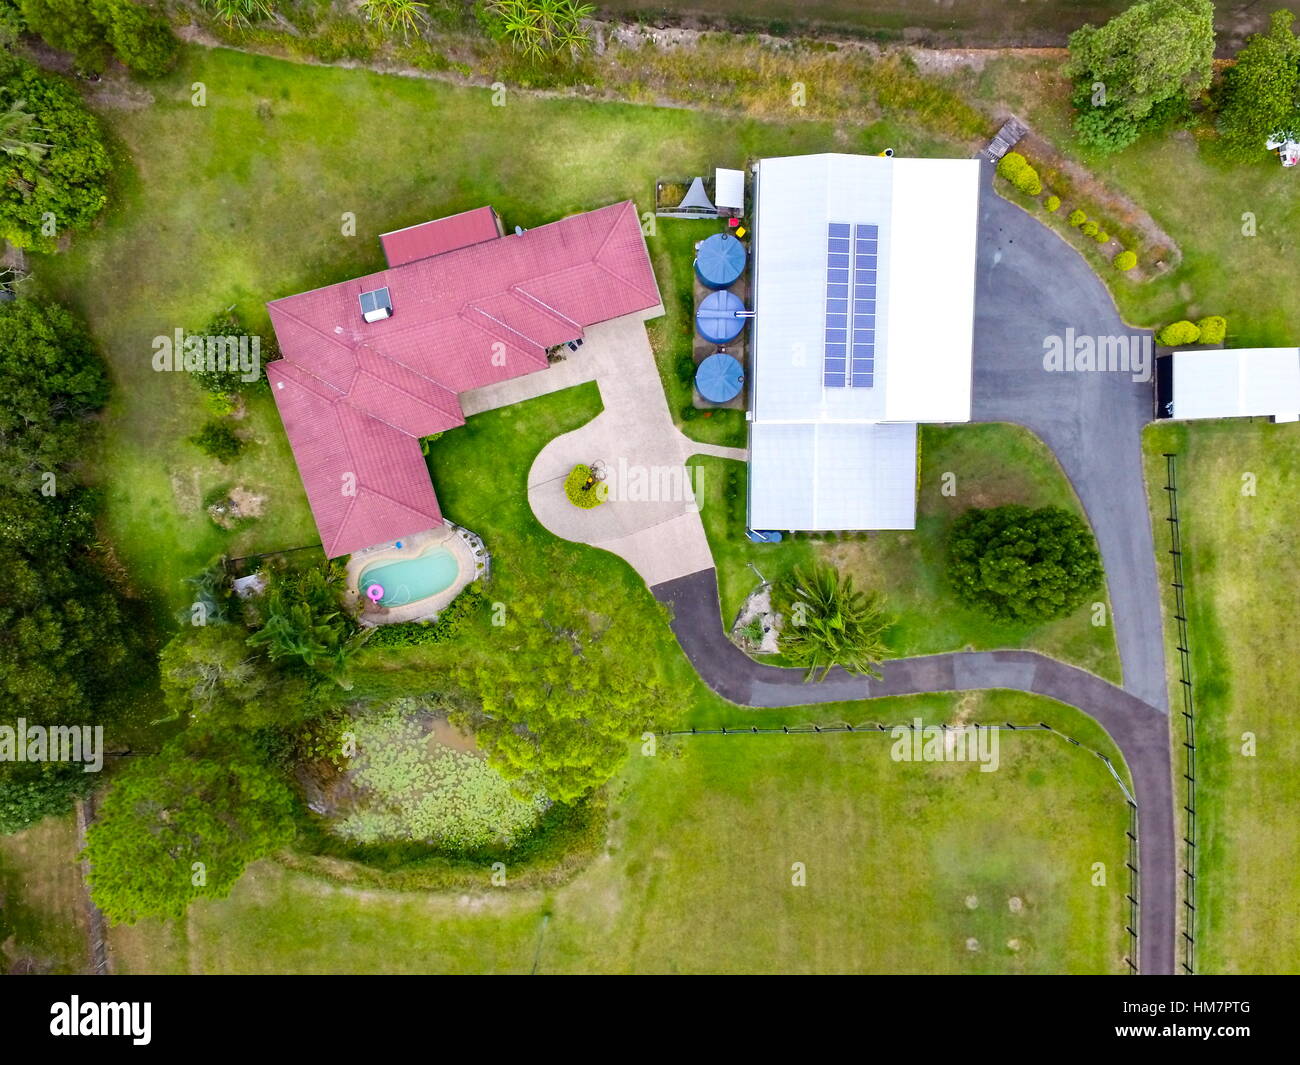 Aerial view looking down on a farm house with red roof and water tanks, in Queensland, Australia. Stock Photo